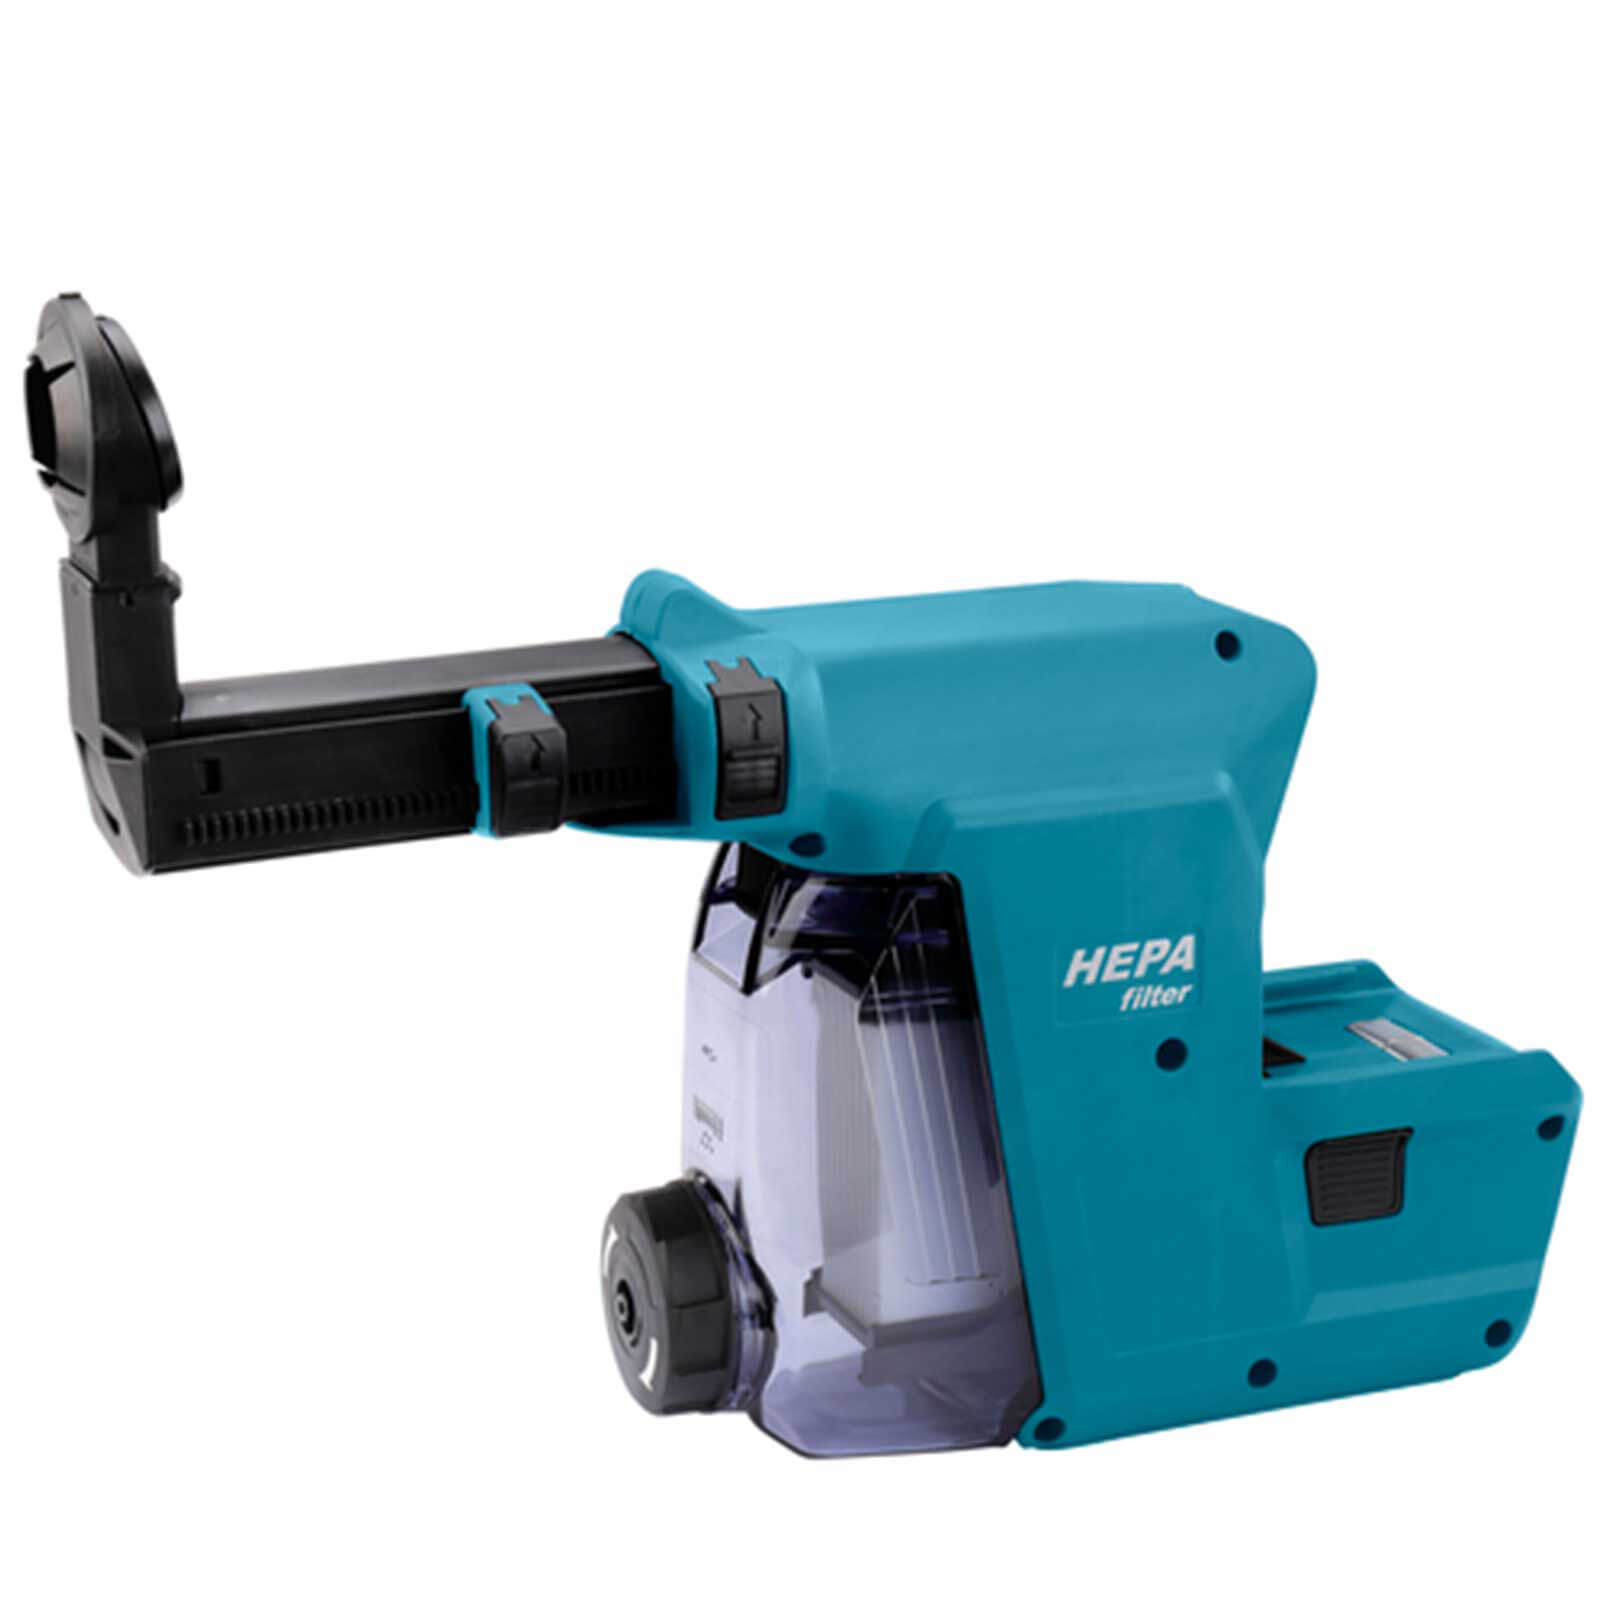 Makita DX06 Dust Extraction System for DHR242 Cordless SDS Drill